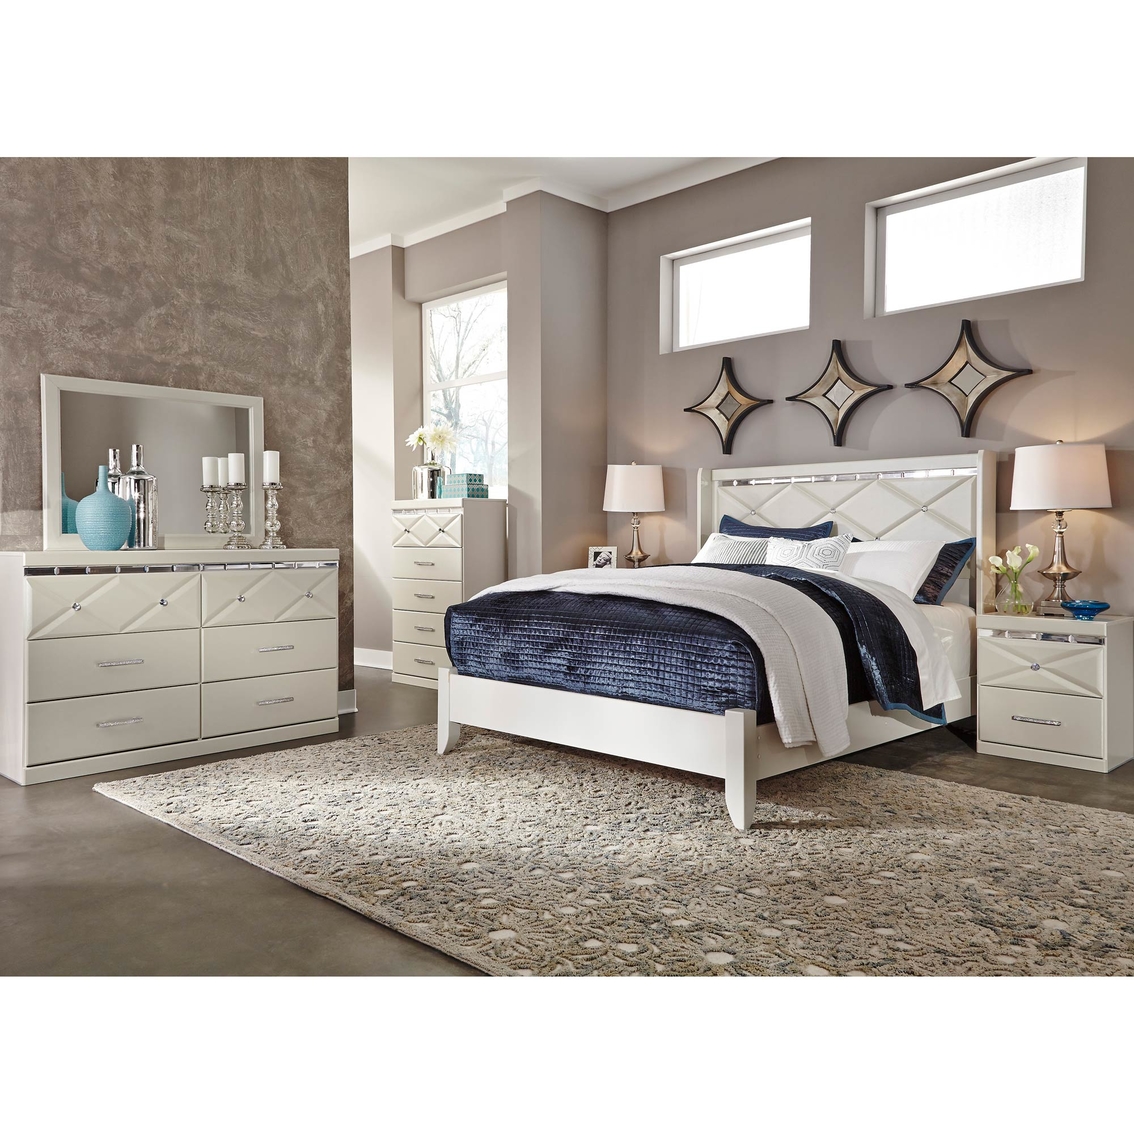 Signature Design by Ashley Dreamur Panel Bed - Image 2 of 4